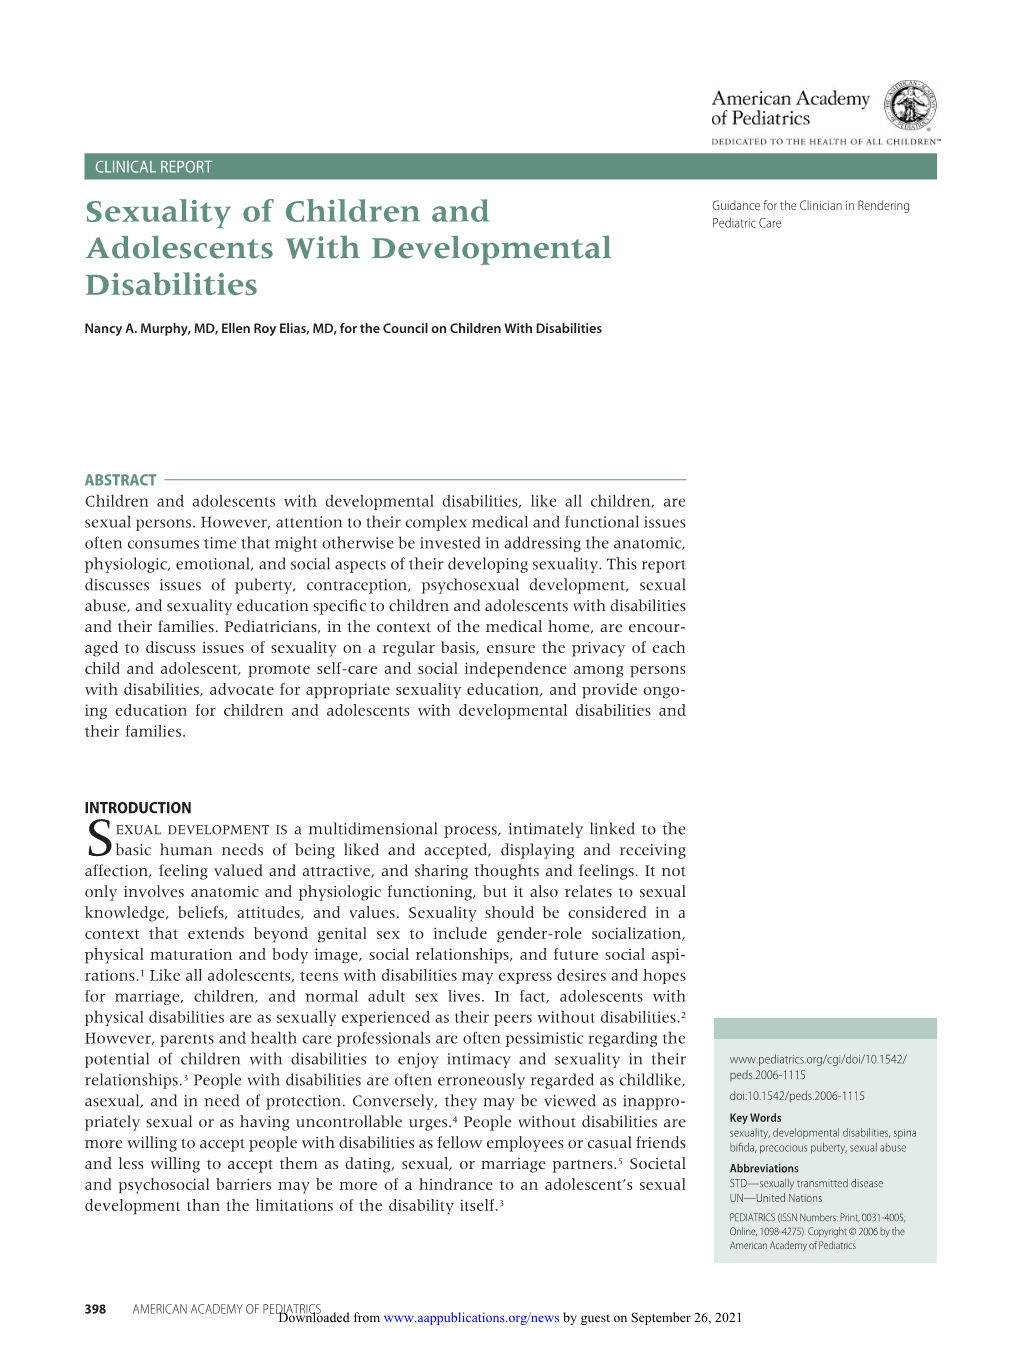 Sexuality of Children and Adolescents with Developmental Disabilities Nancy A